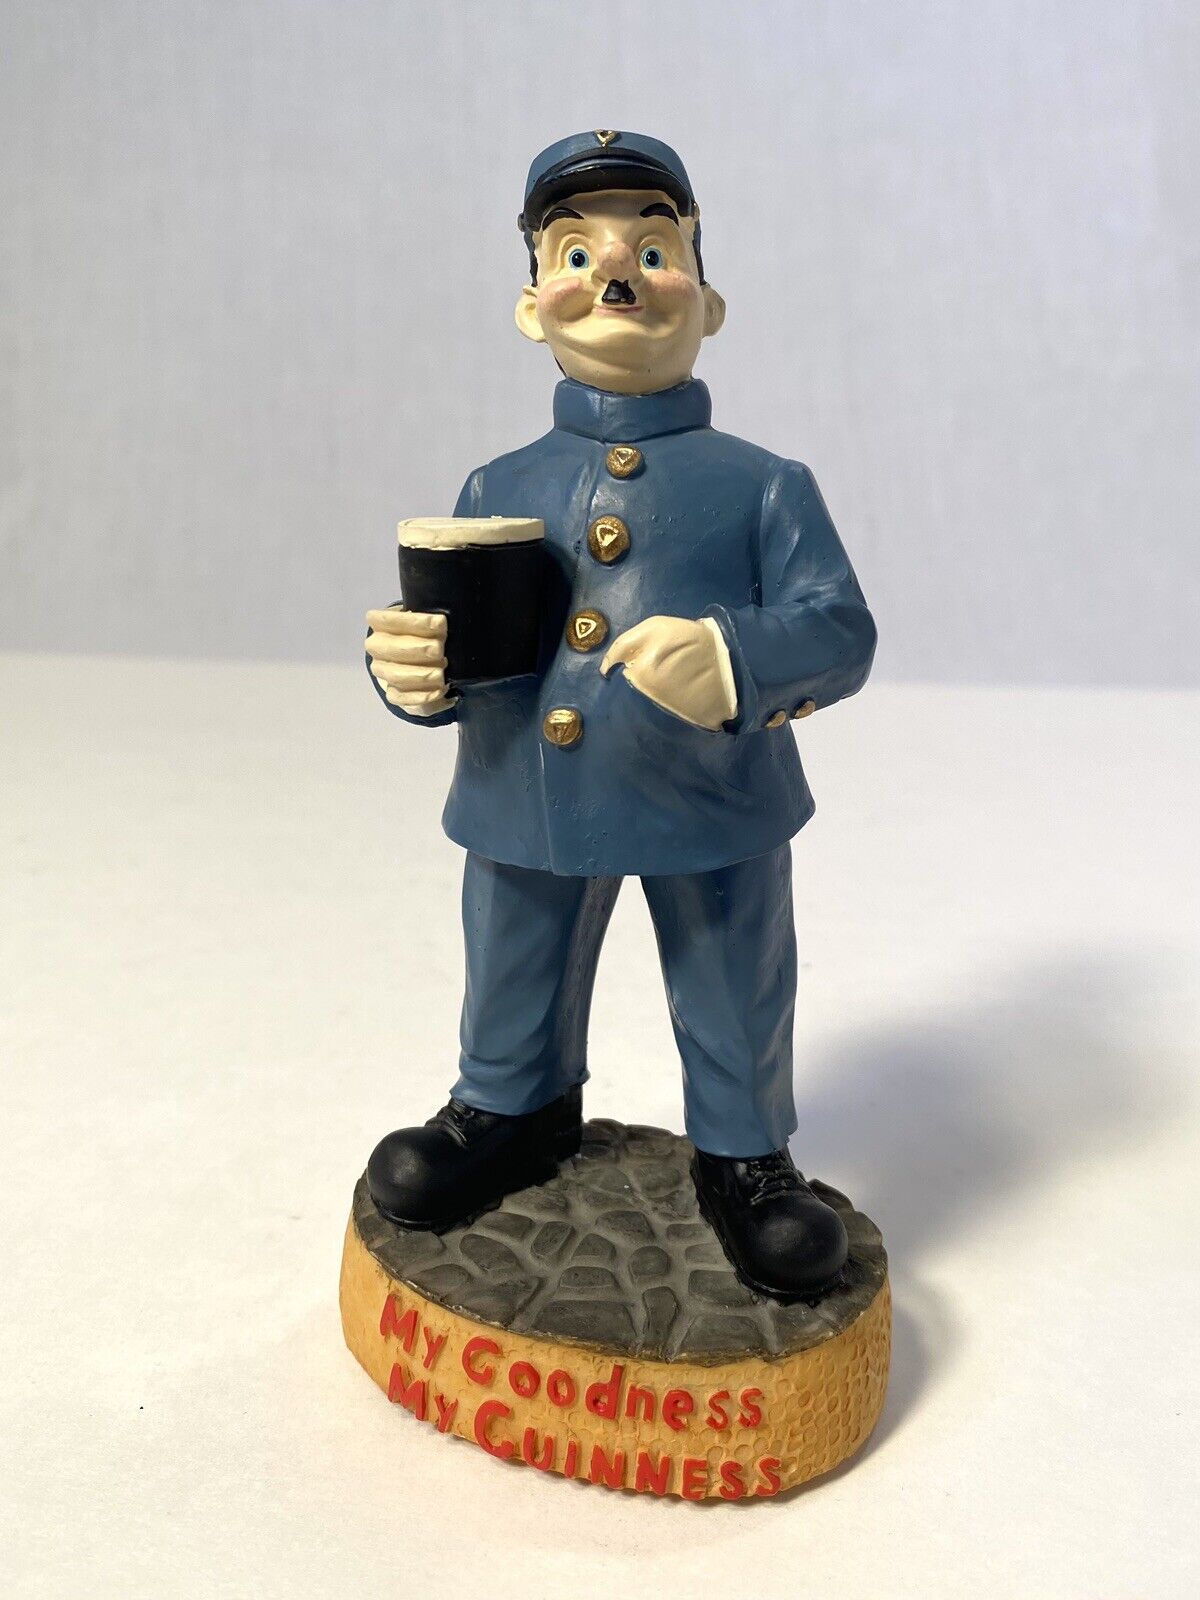 Vintage Beer Ad My Goodness My Guinness Zookeeper Figurine Dublin Numbered